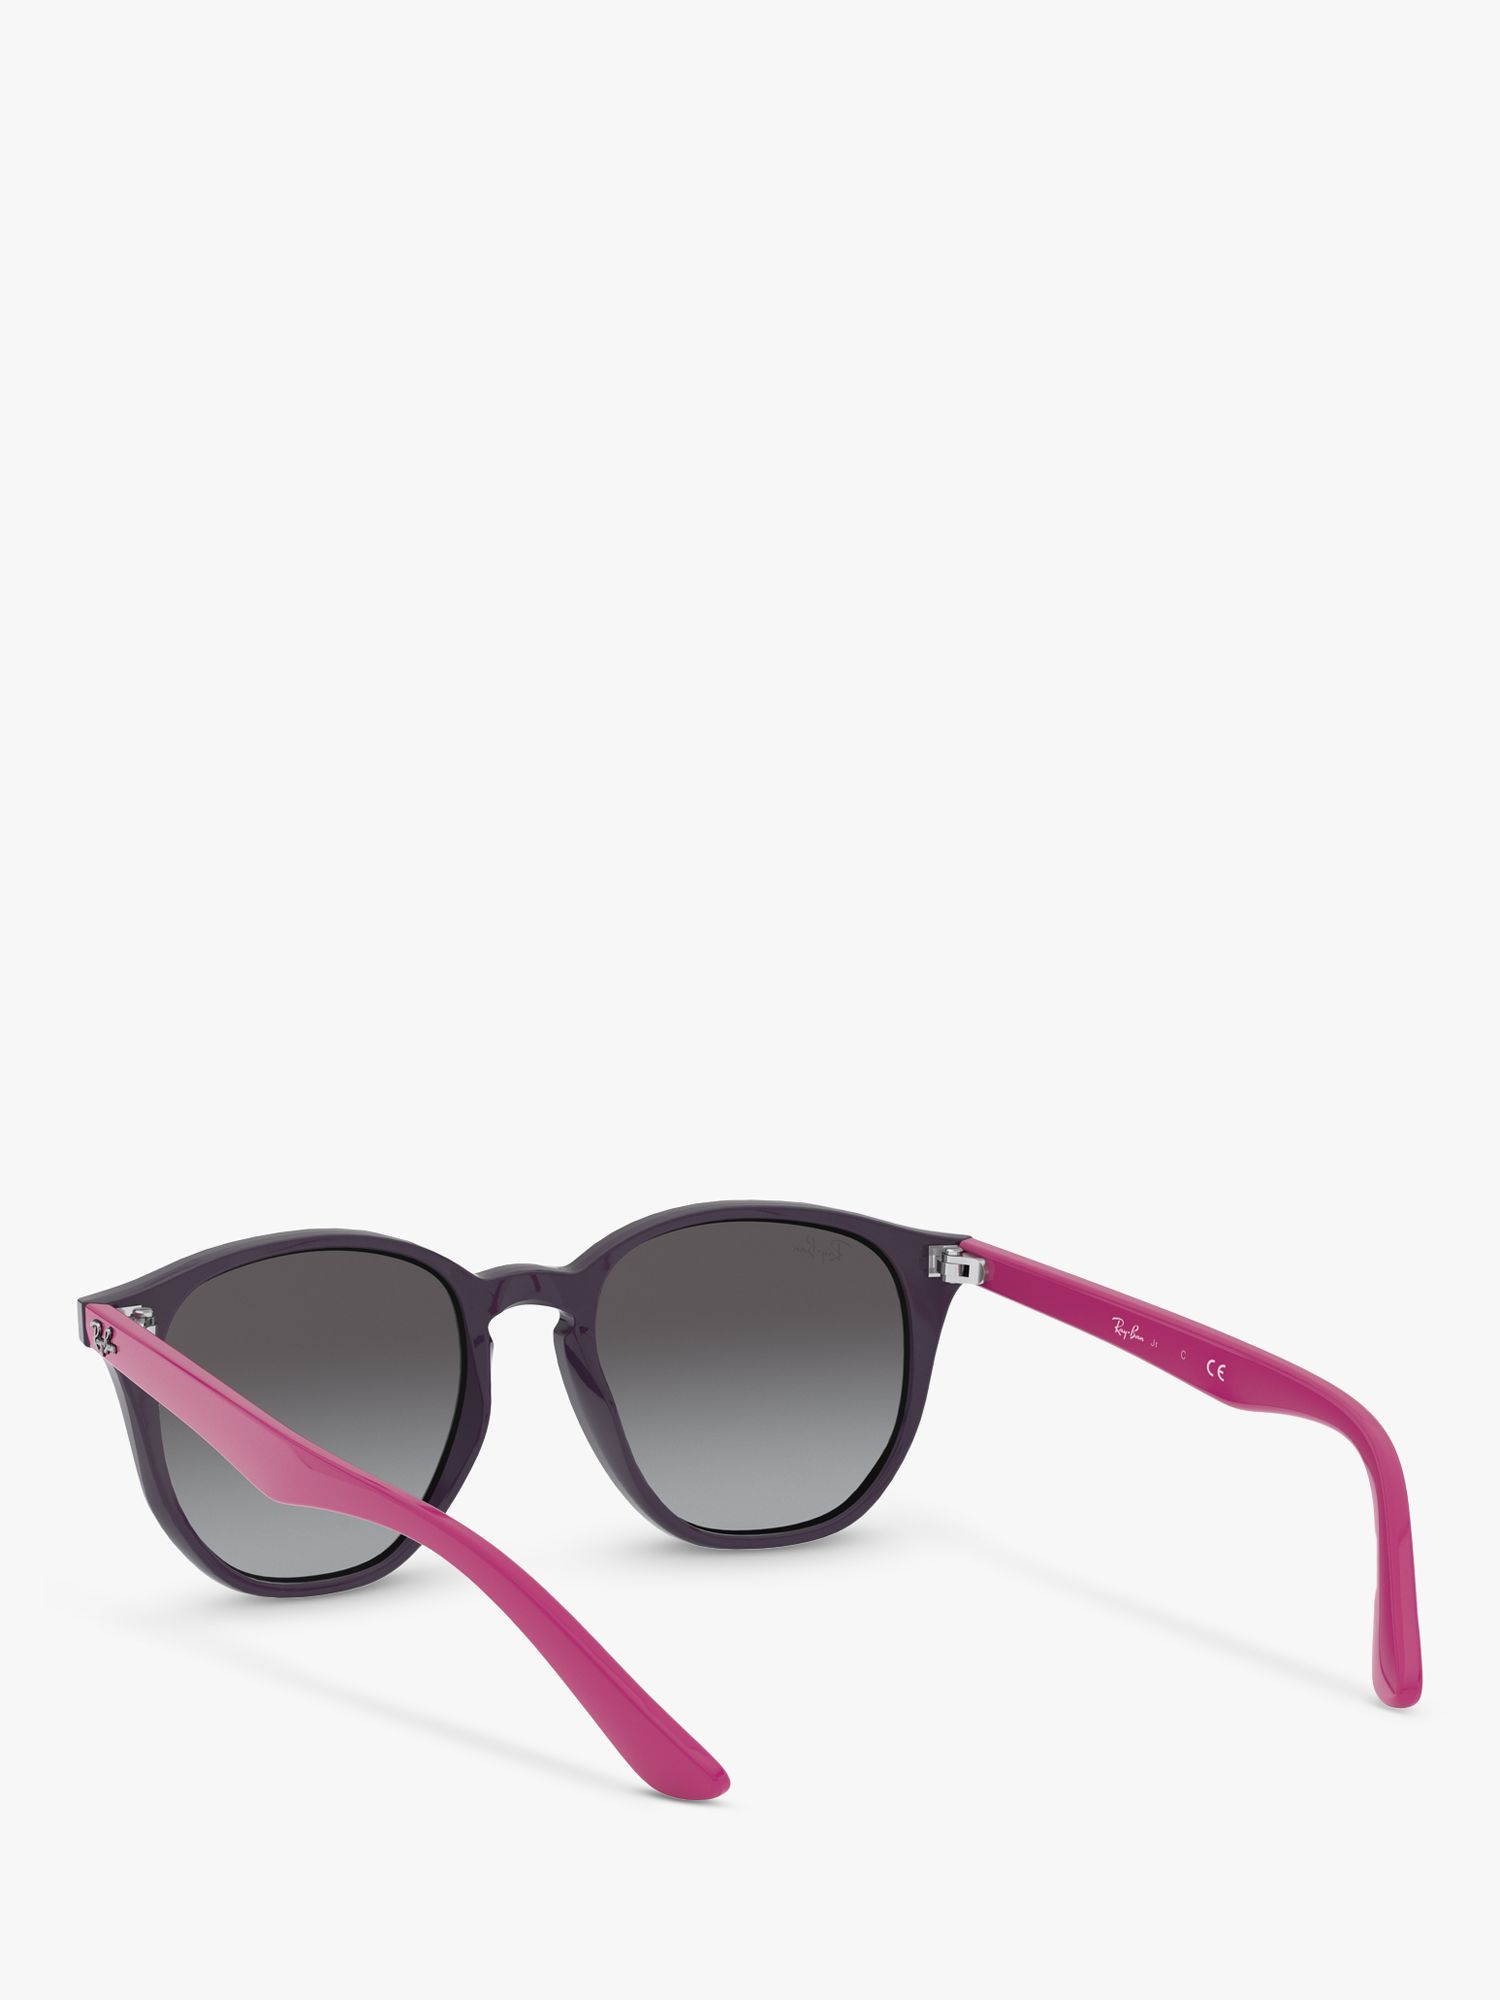 Buy Ray-Ban Junior RJ9070S Oval Sunglasses Online at johnlewis.com